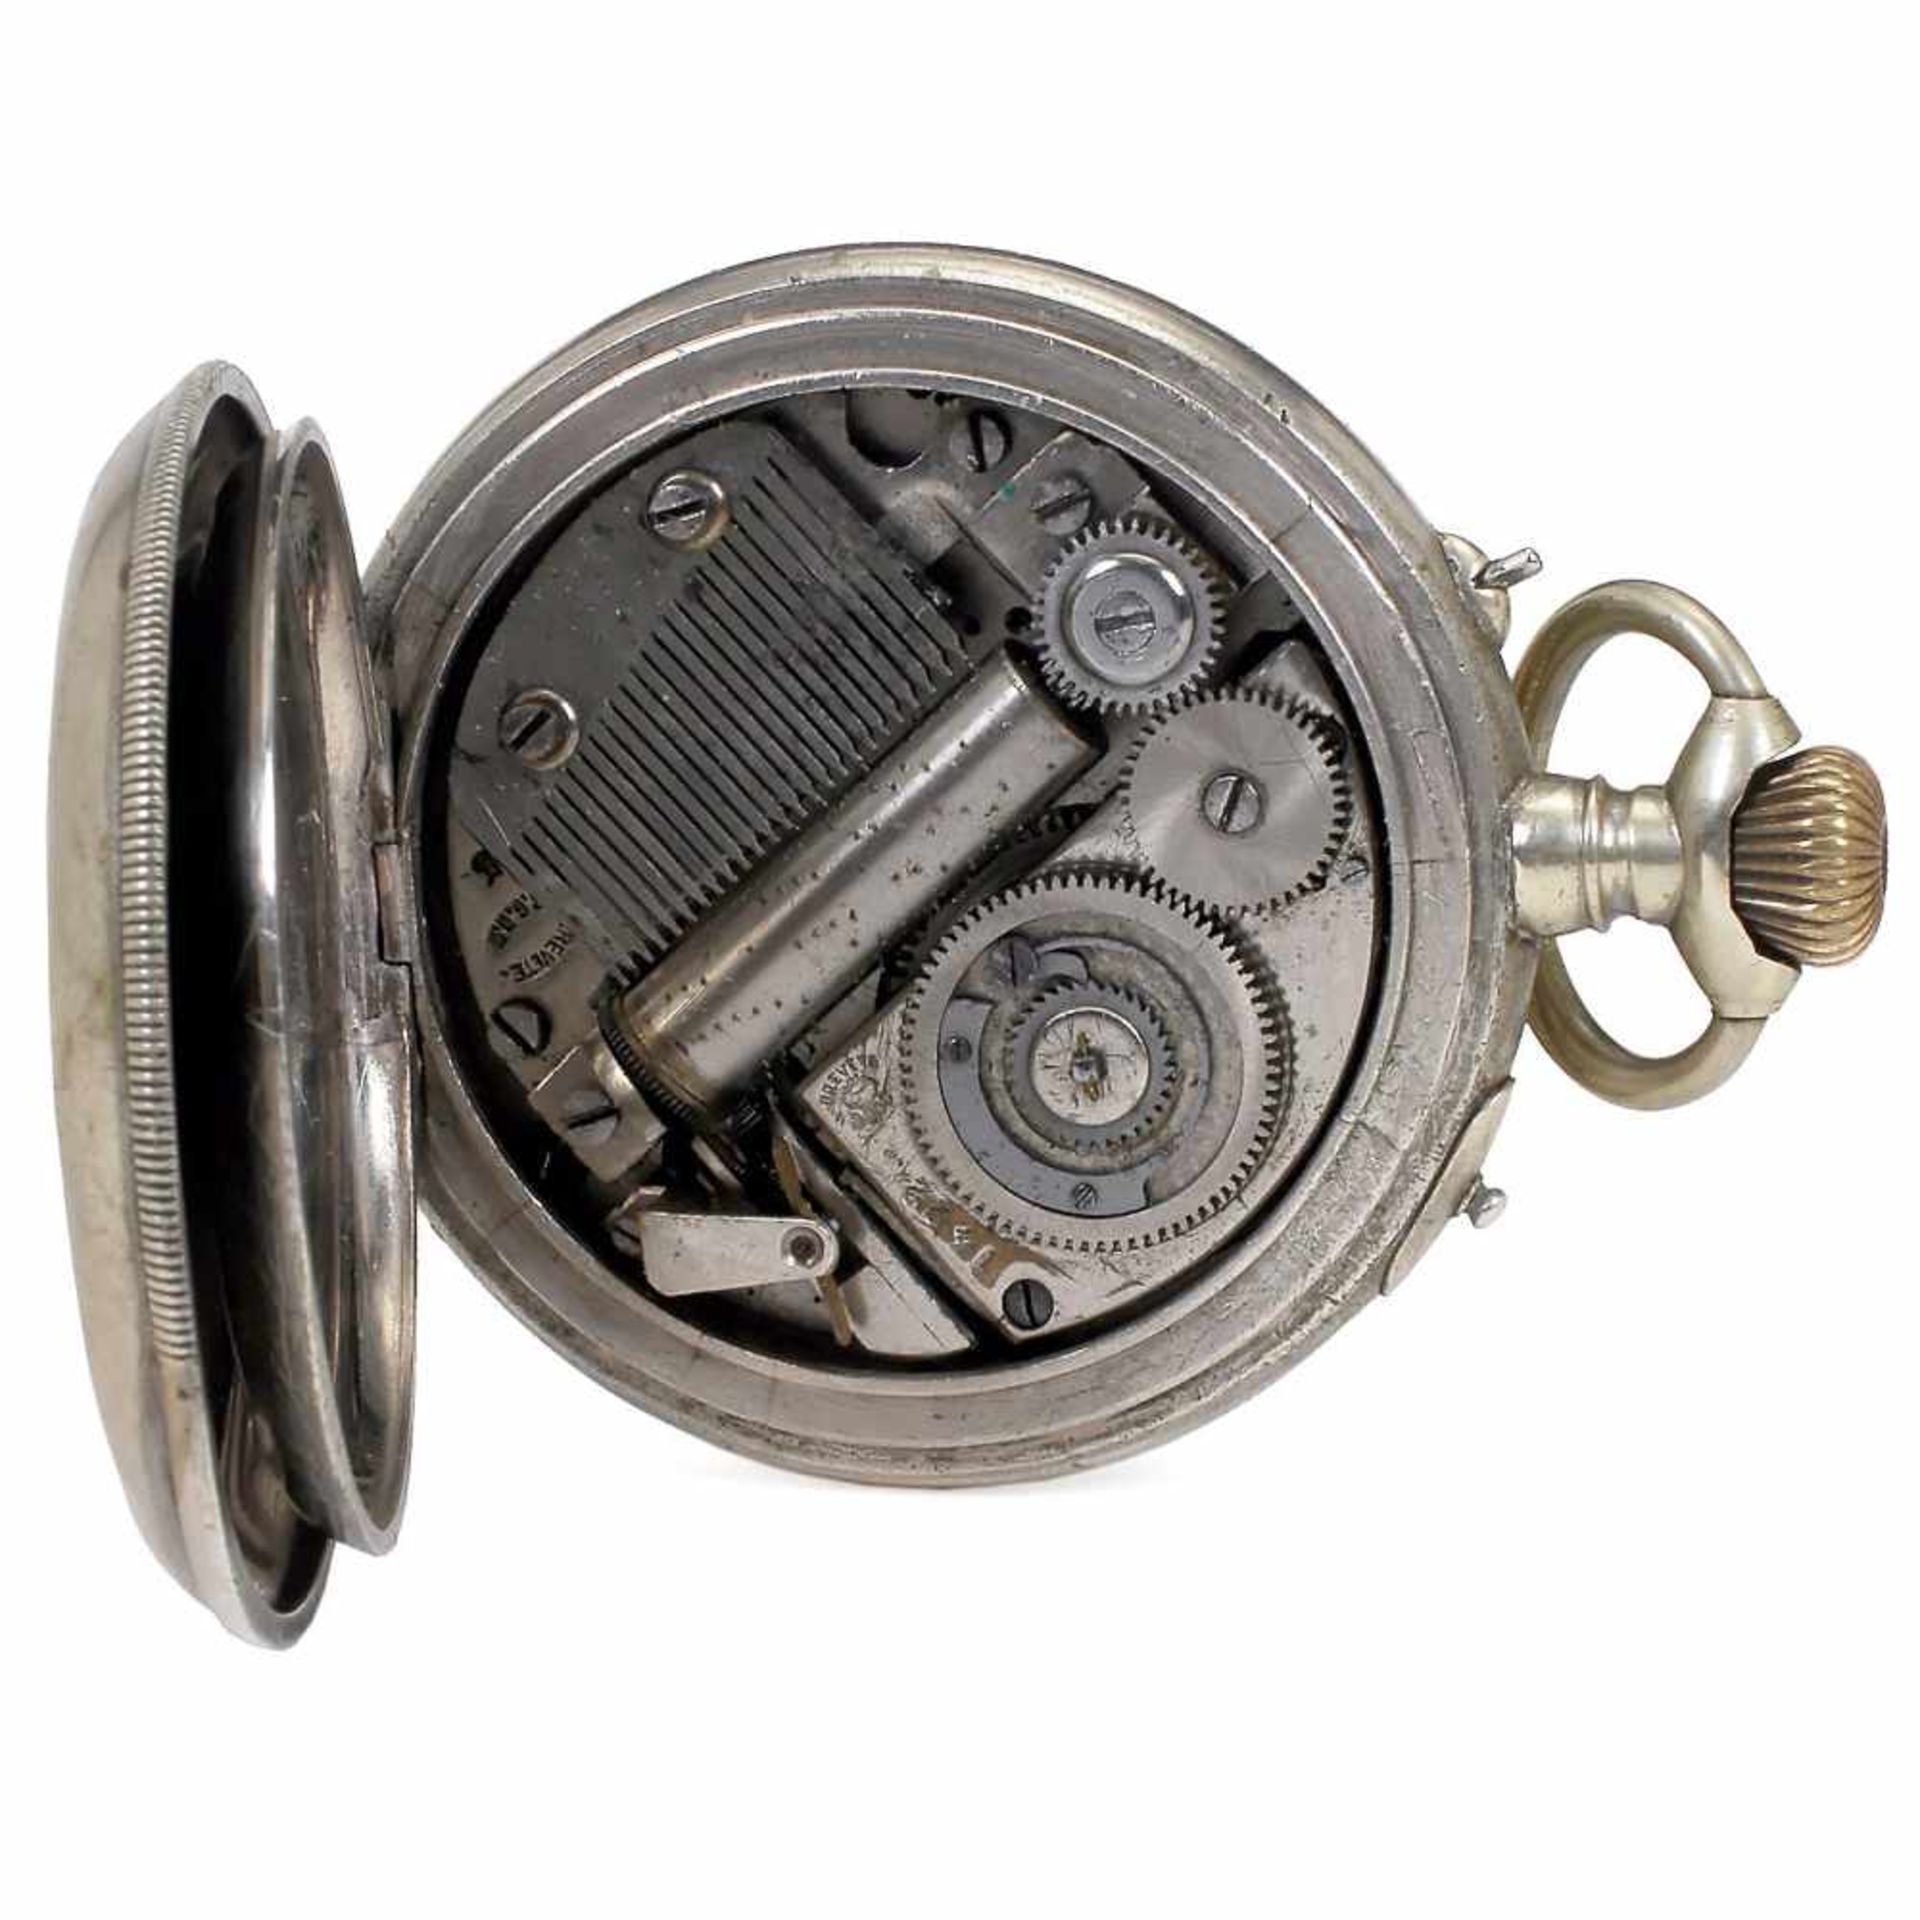 Musical Watch with Alarm by L'Epée, c. 1885No. 1422, with 2-inch (5 cm) enameled Arabic dial with - Bild 2 aus 2